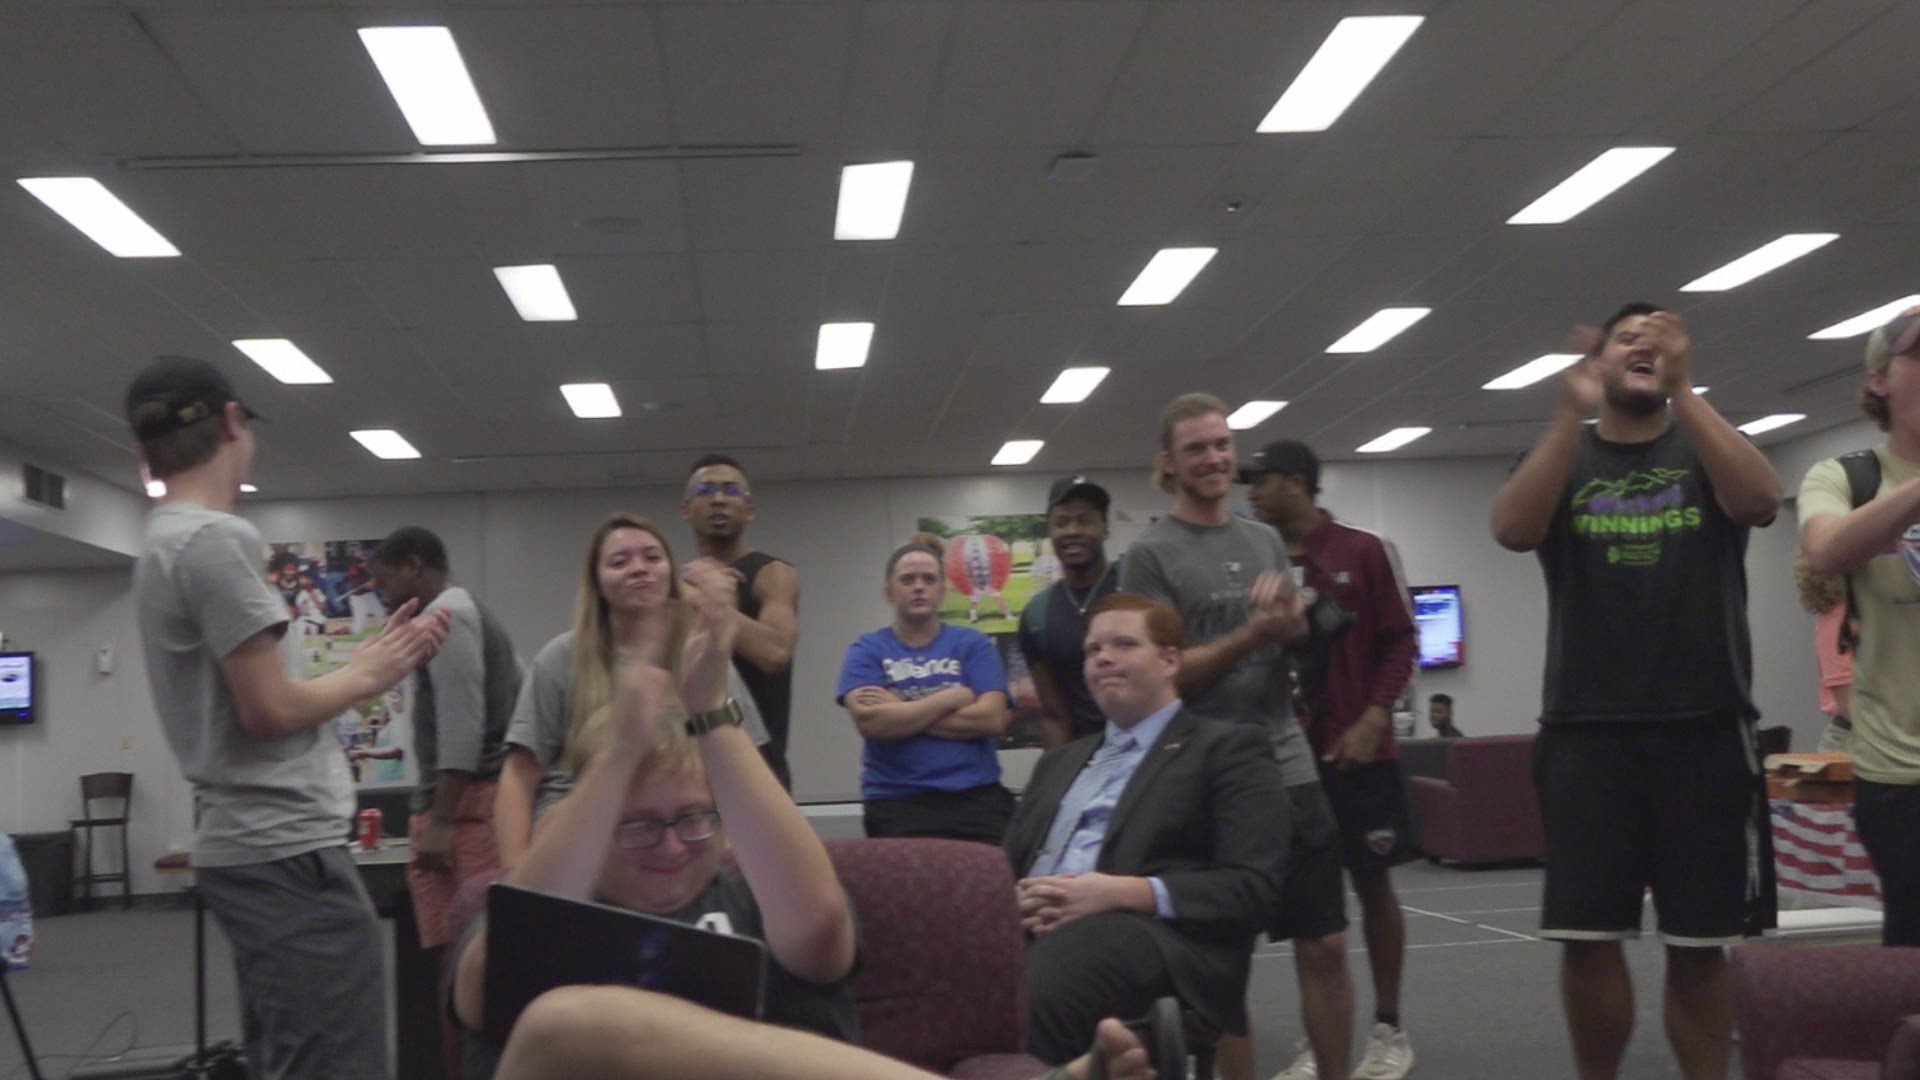 McMurry students react to election results